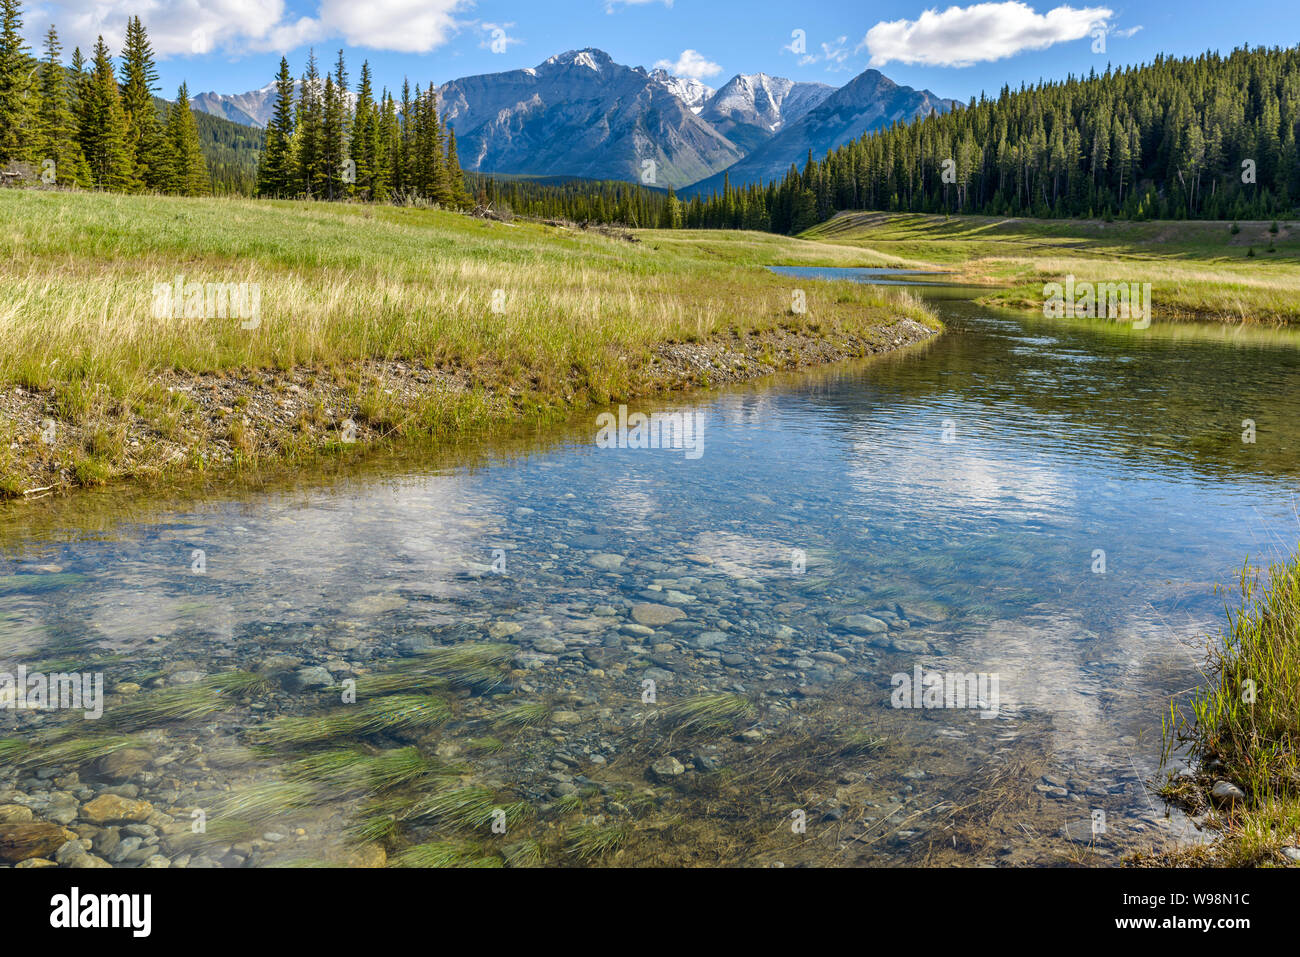 Spring Creek - A close-up wide-Angle view of a crystal-clear mountain creek at base of Mt. Astley, Banff National Park, Alberta, Canada. Stock Photo